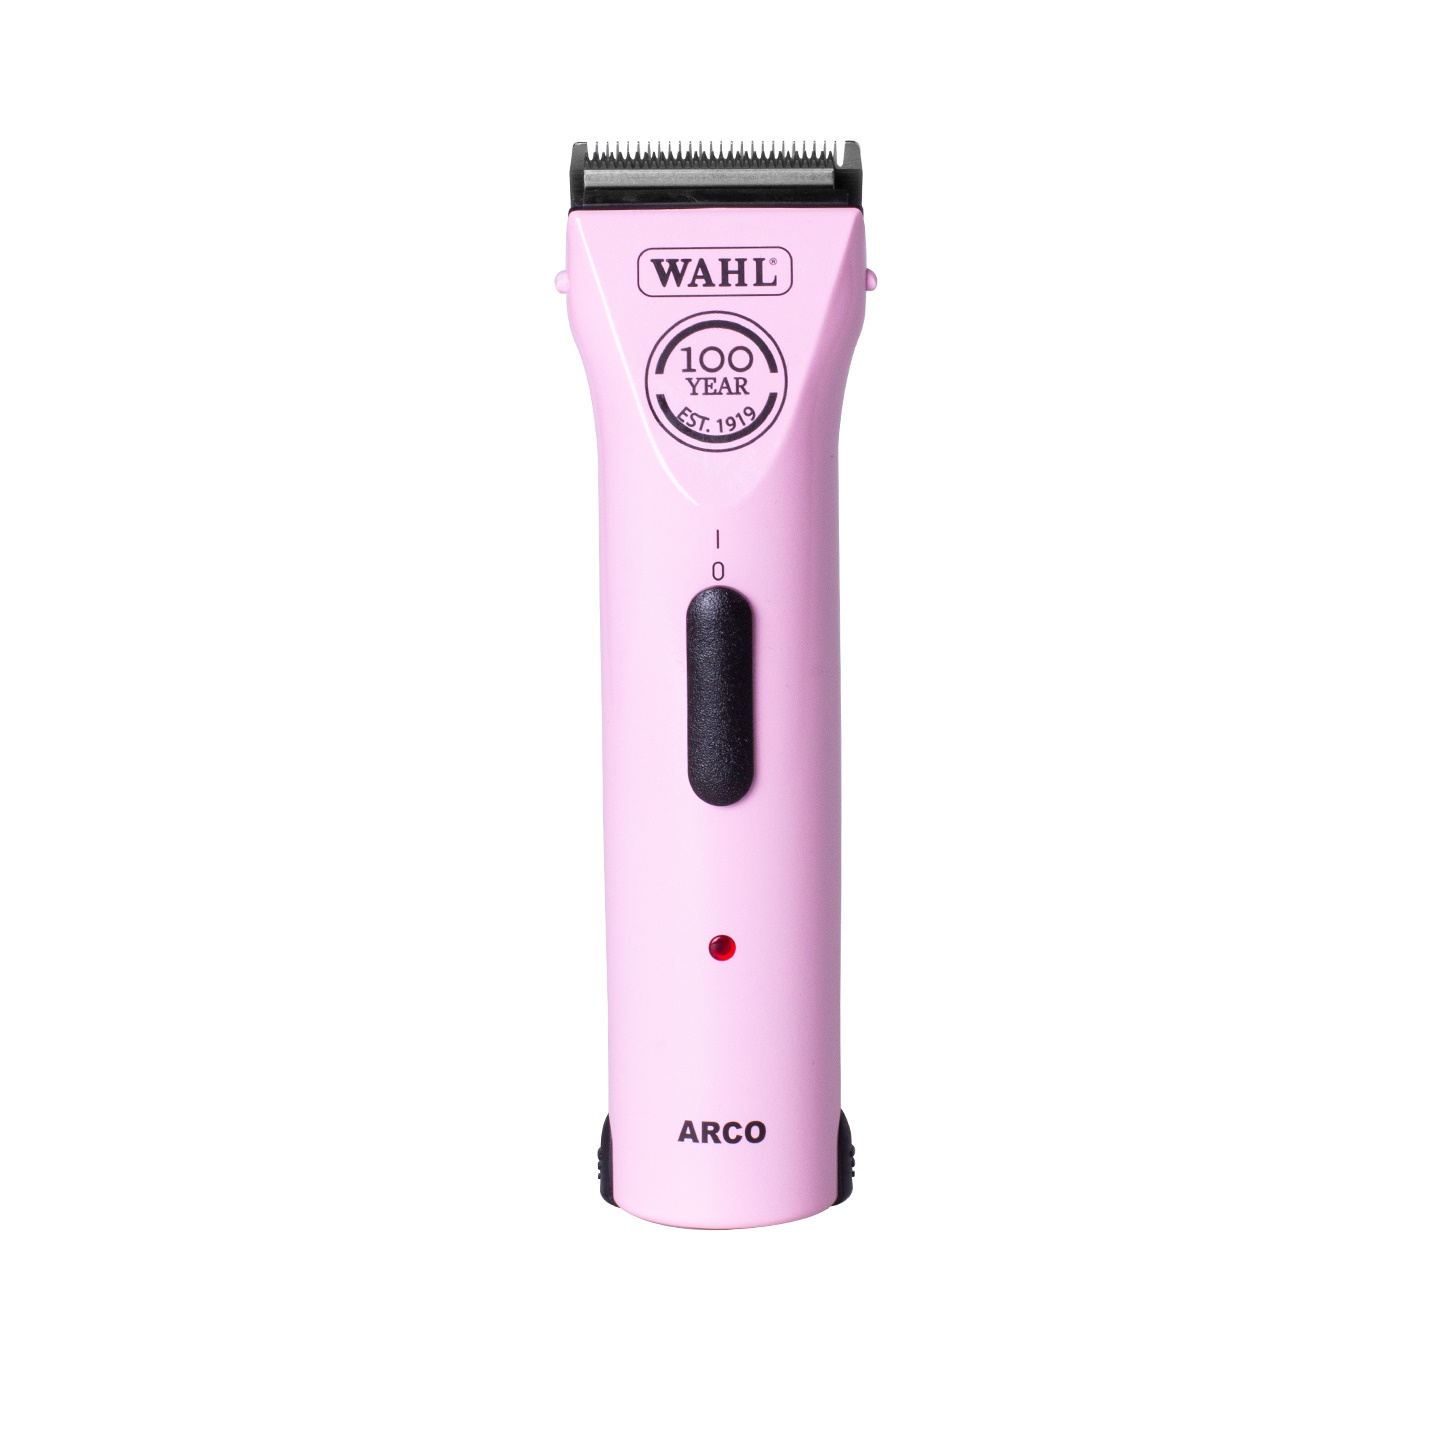 arco dog clippers